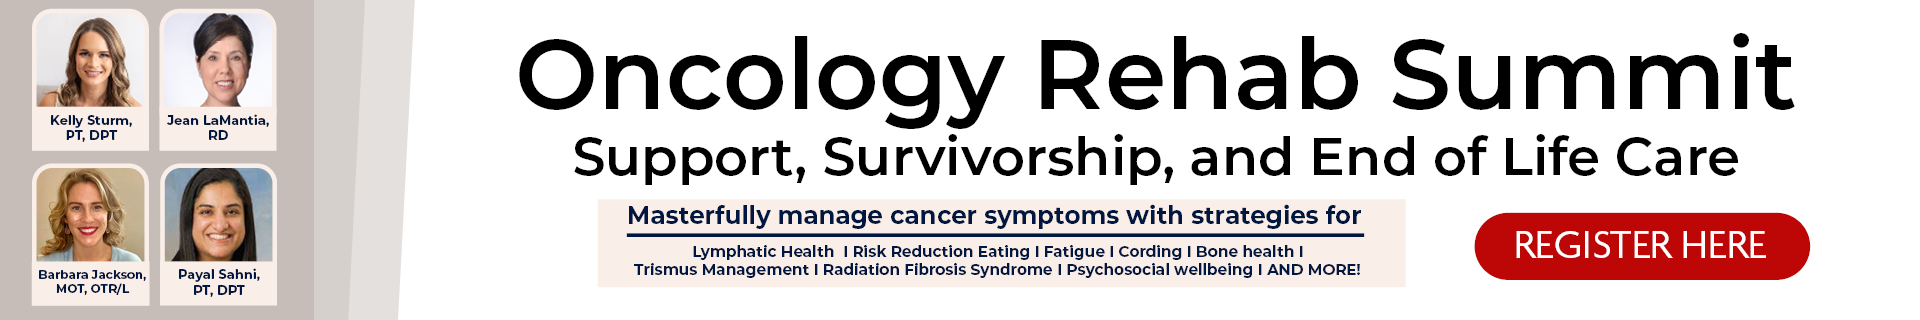 Oncology Rehab Course: Support, Survivorship, and End of Life Care